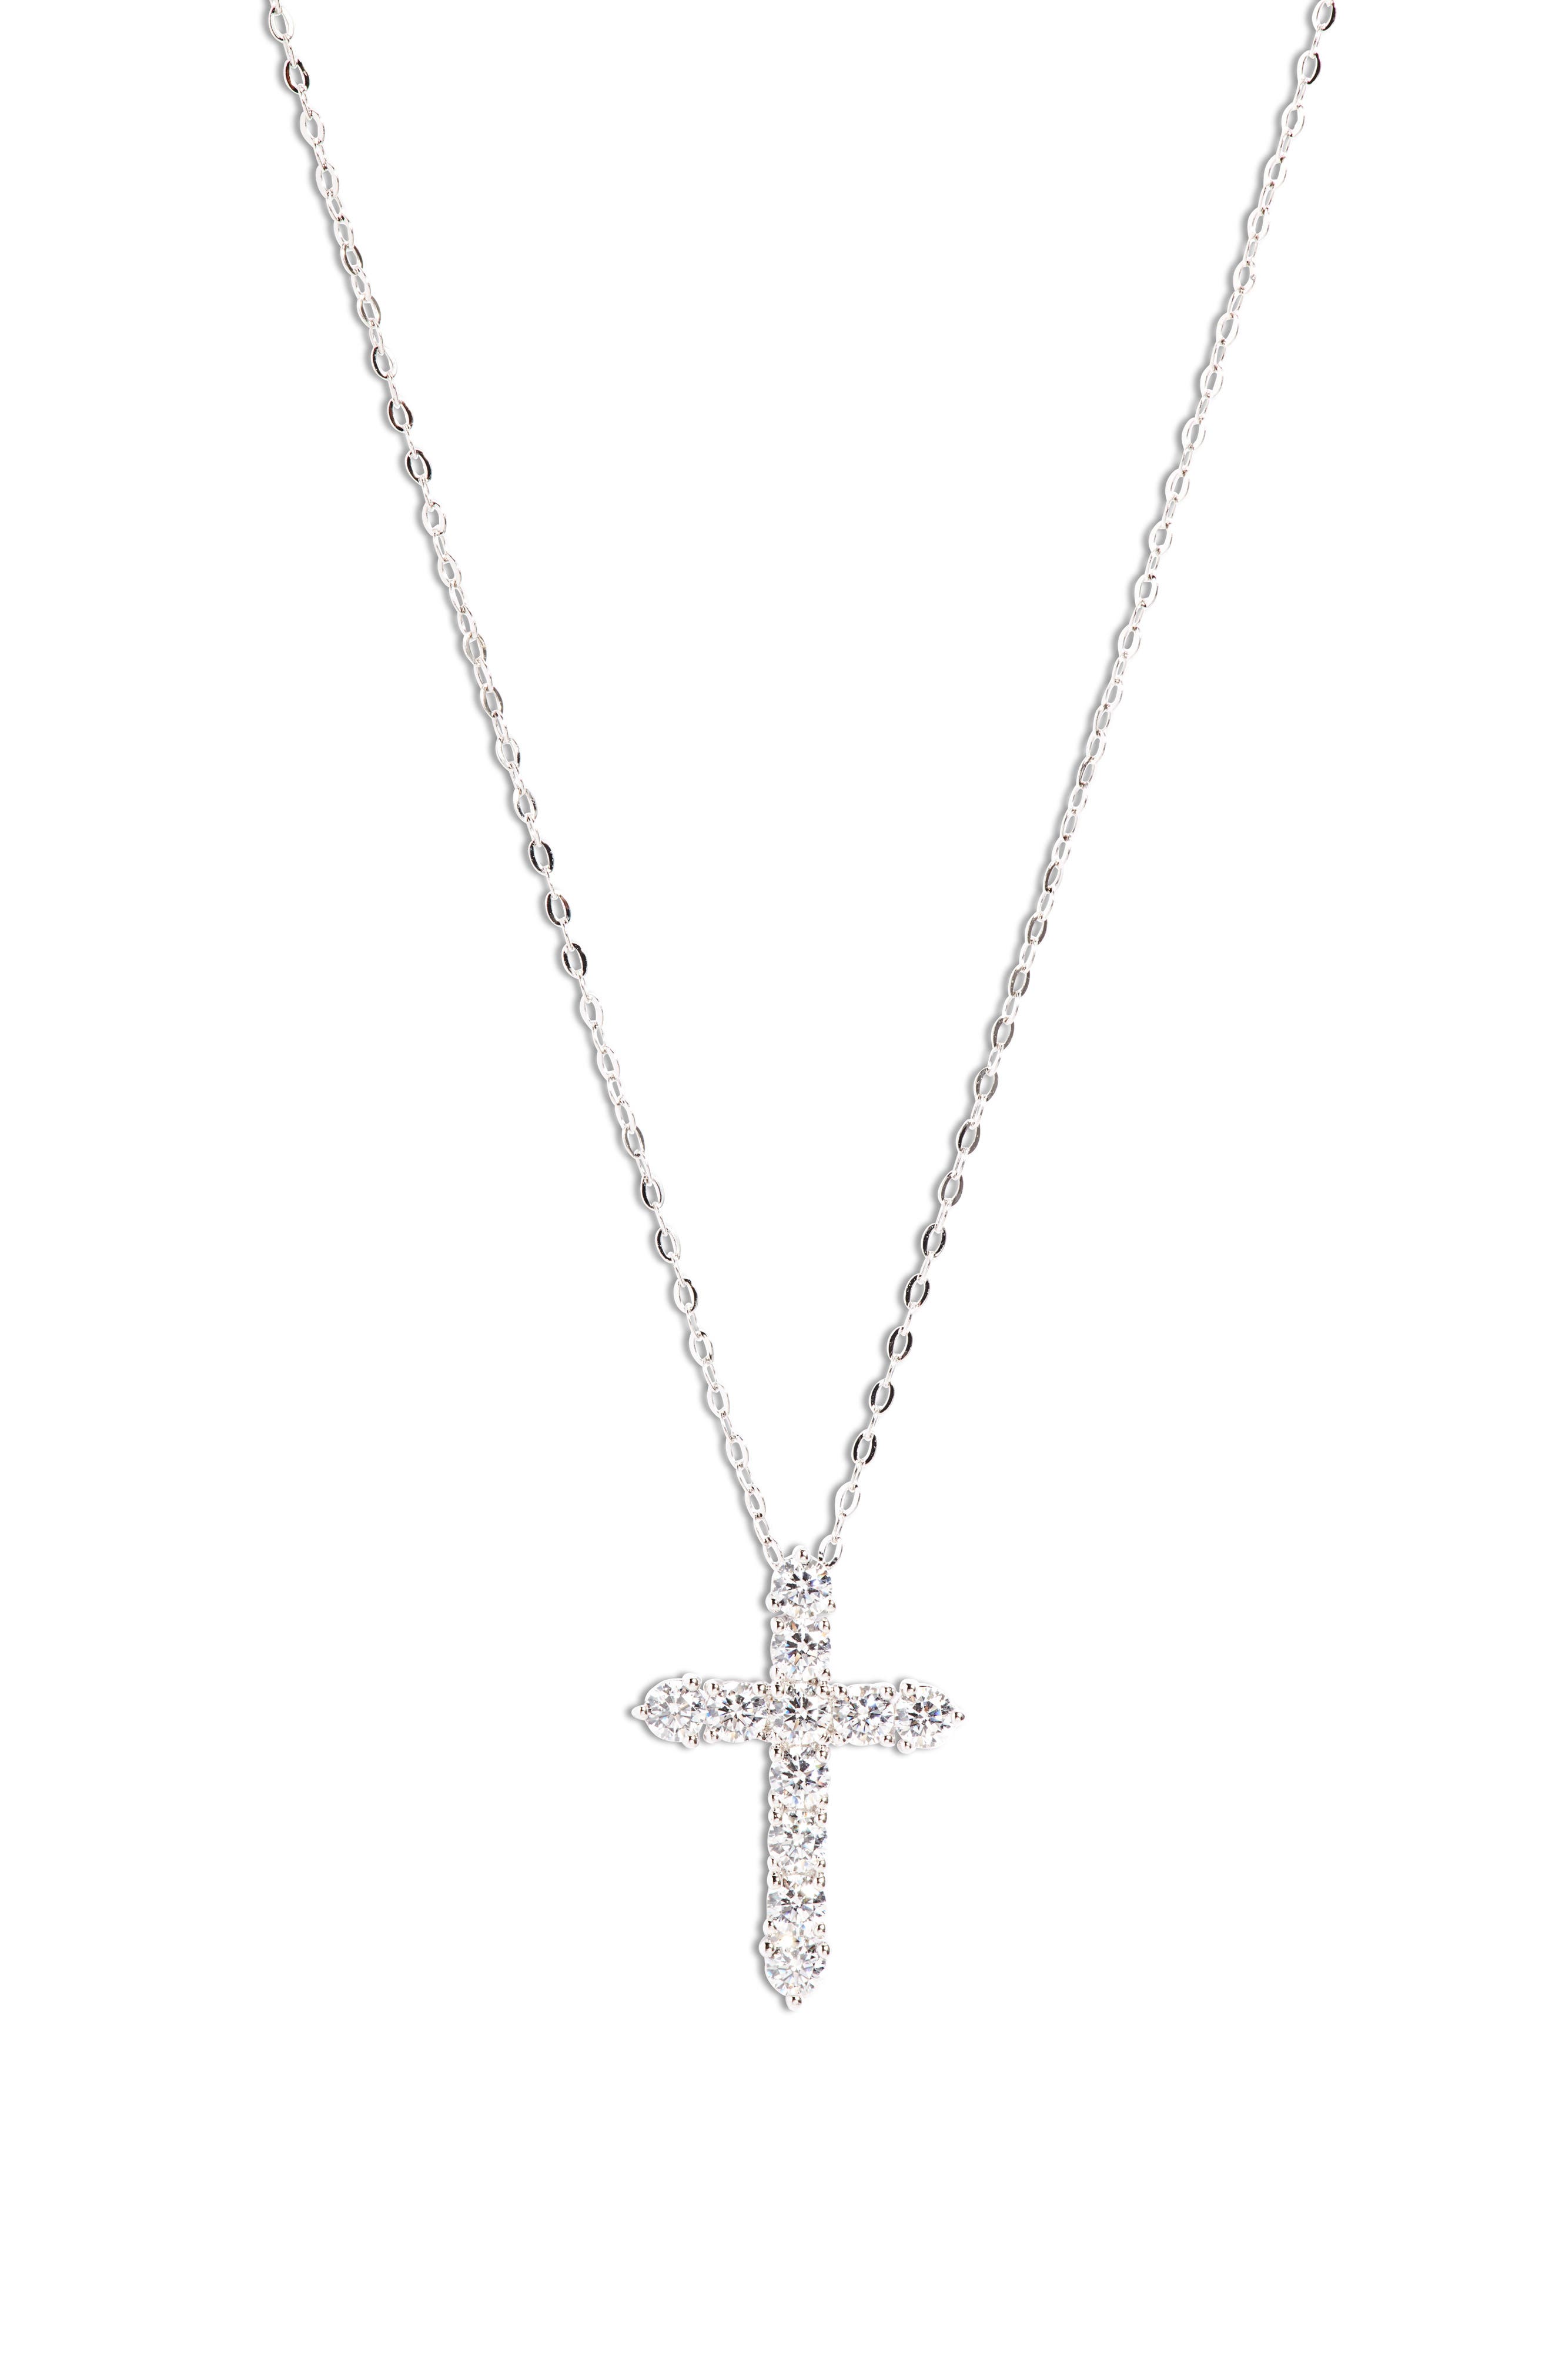 925 CROSS NECKLACE Necklace407 Vermeil Sterling Silver 18 inch White Topaz Estate Sale FLOATING